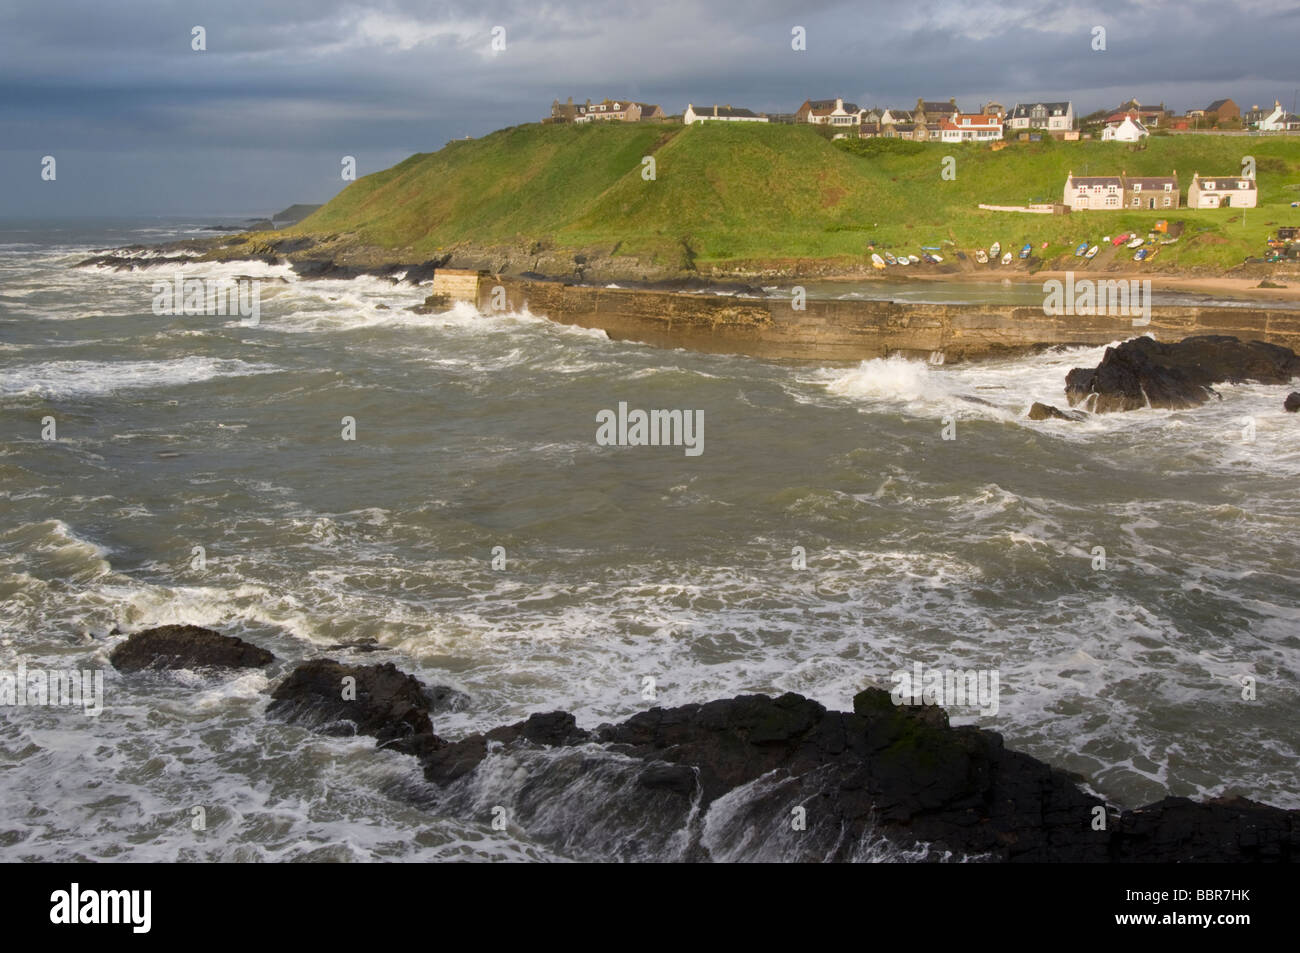 Stormy waves at the traditional fishing village and harbour of Collieston, Scotland. The rocks are of granite. Stock Photo